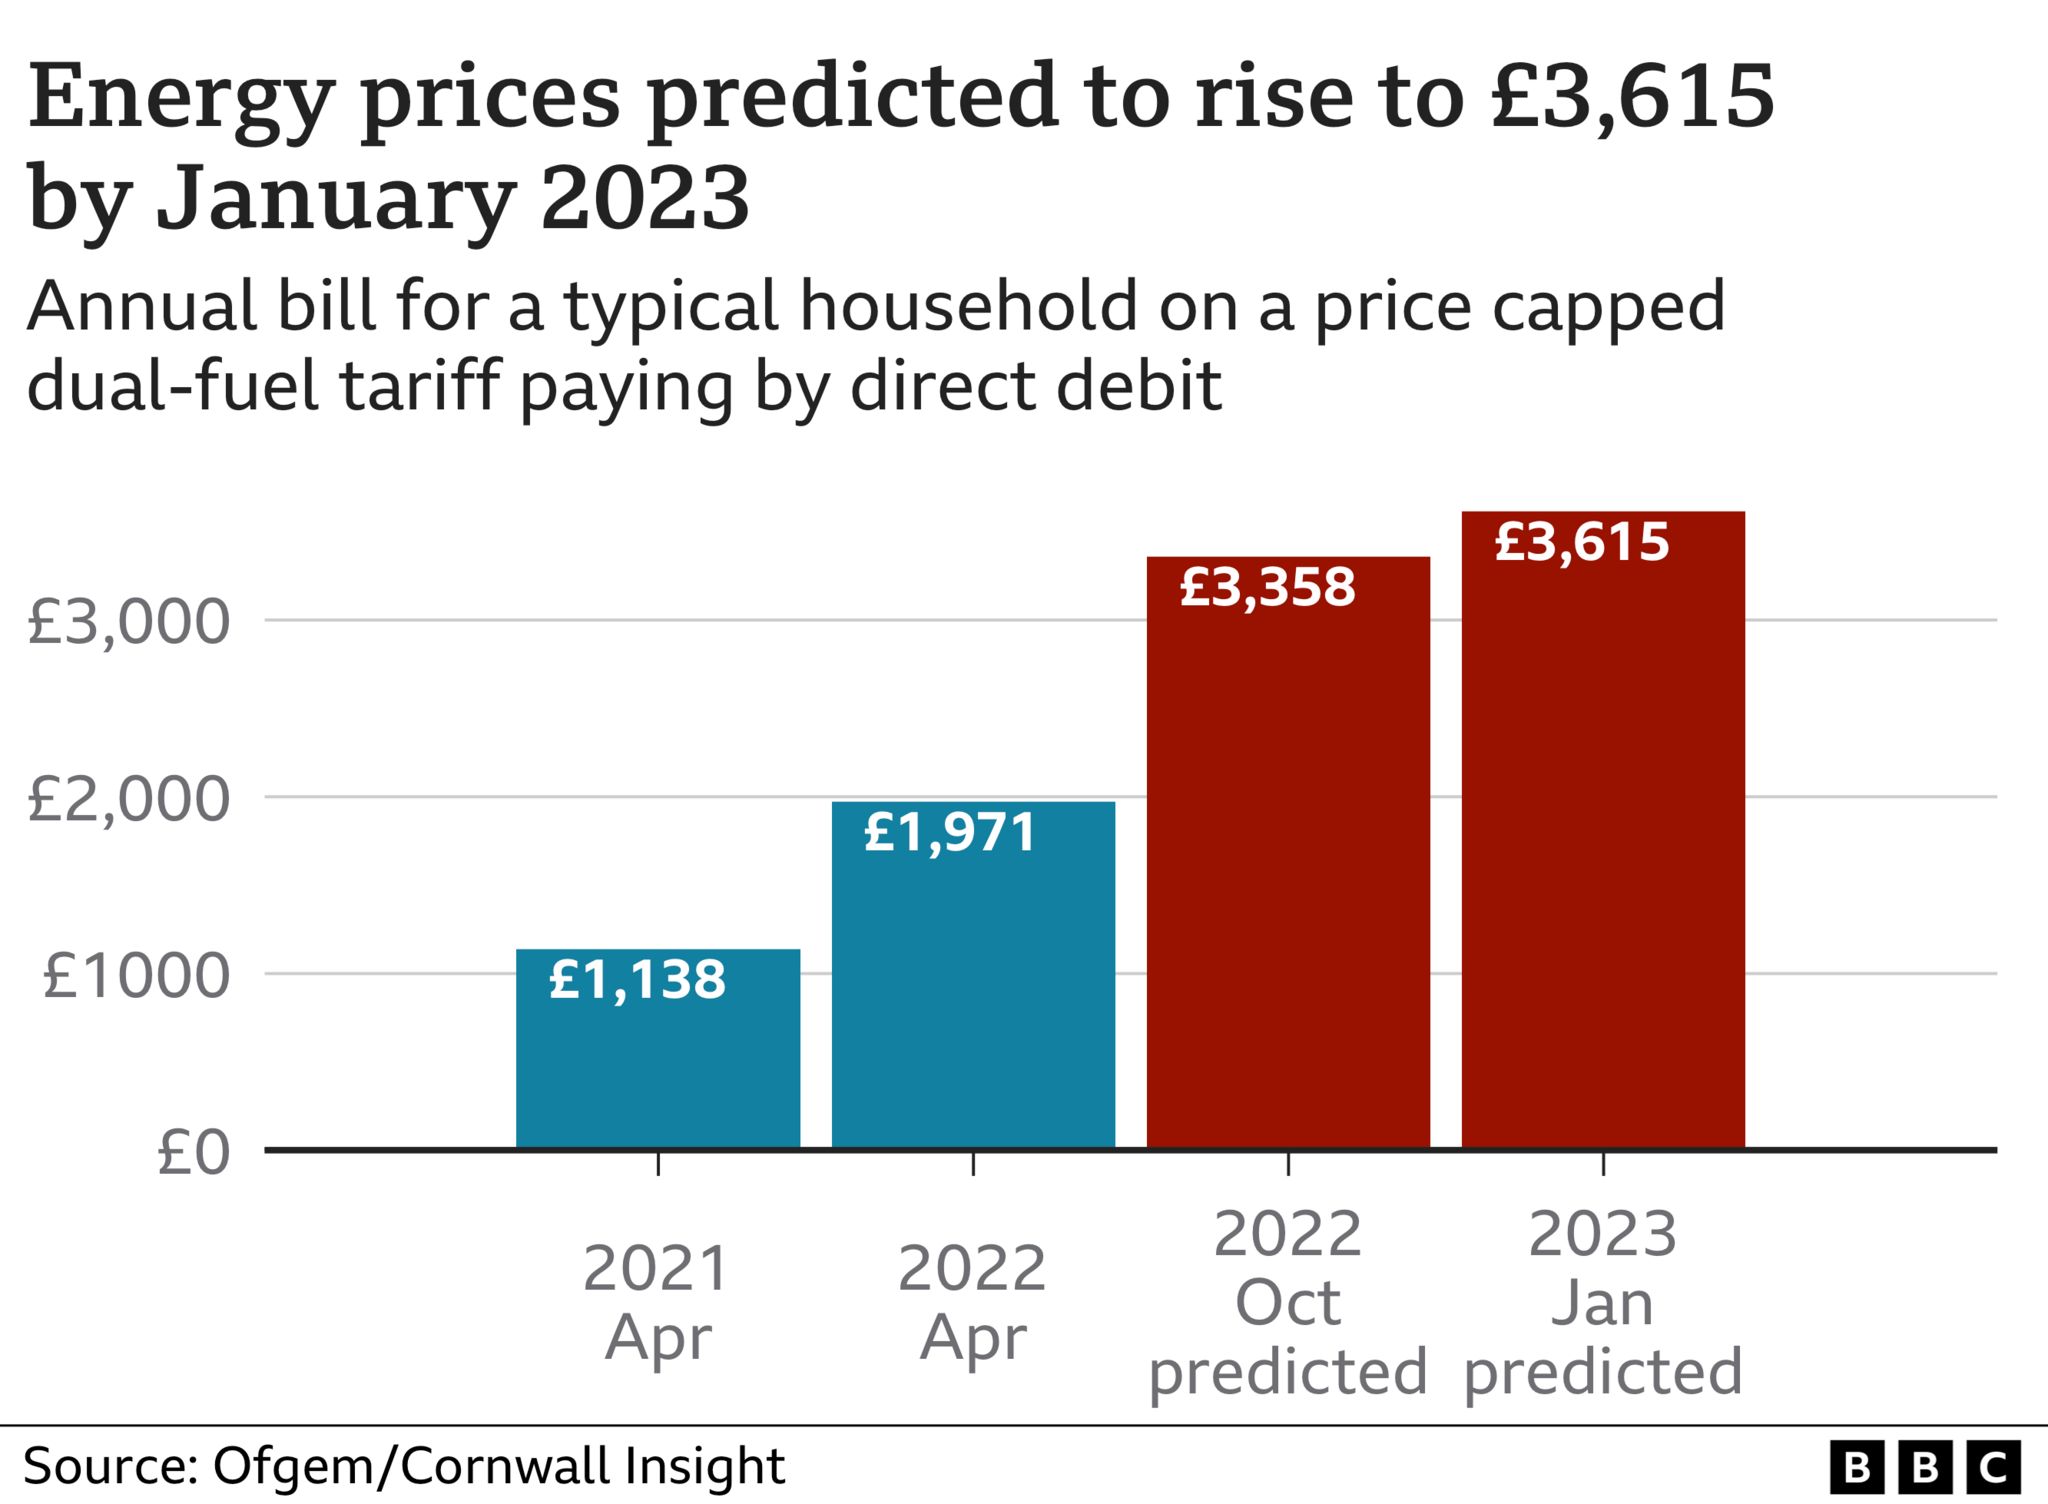 A chart showing energy price predictions